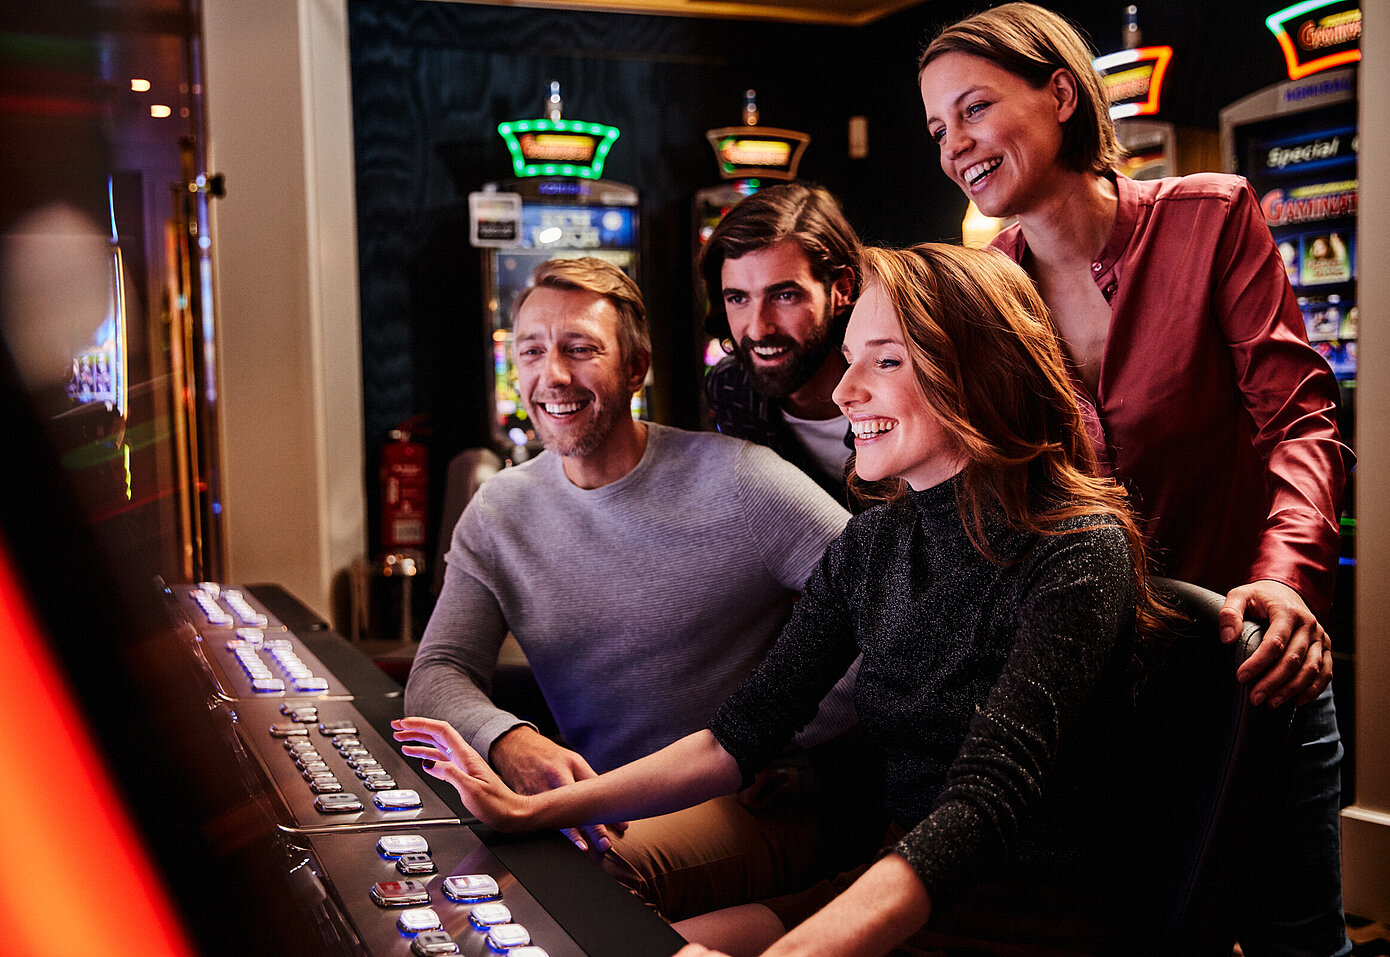 Two men and two women at the slot machine